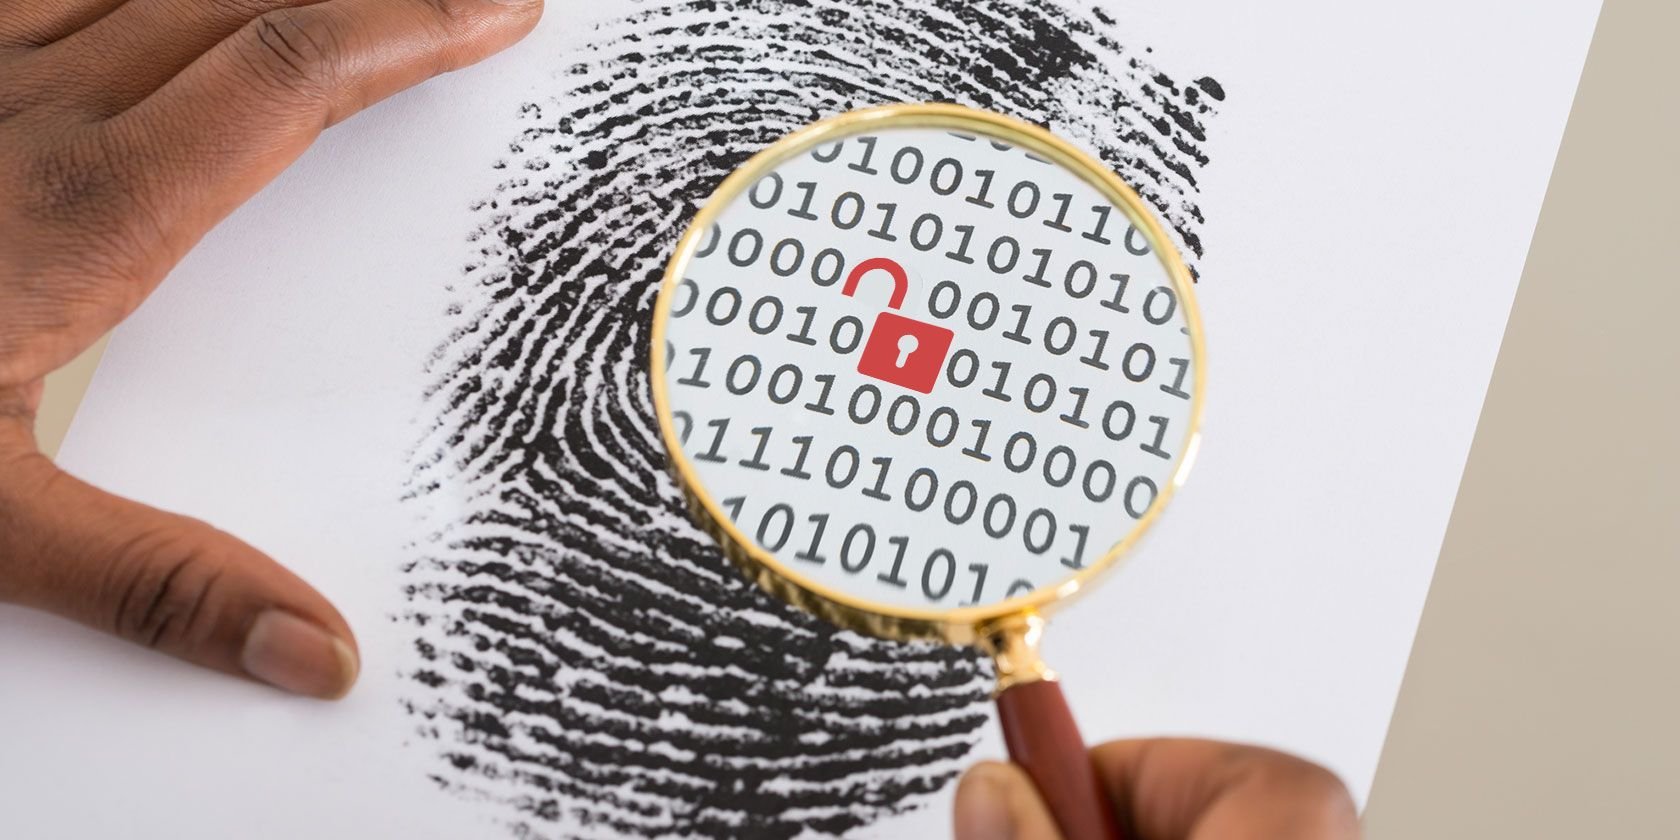 5 Ways Hackers Bypass Fingerprint Scanners (How to Protect Yourself)